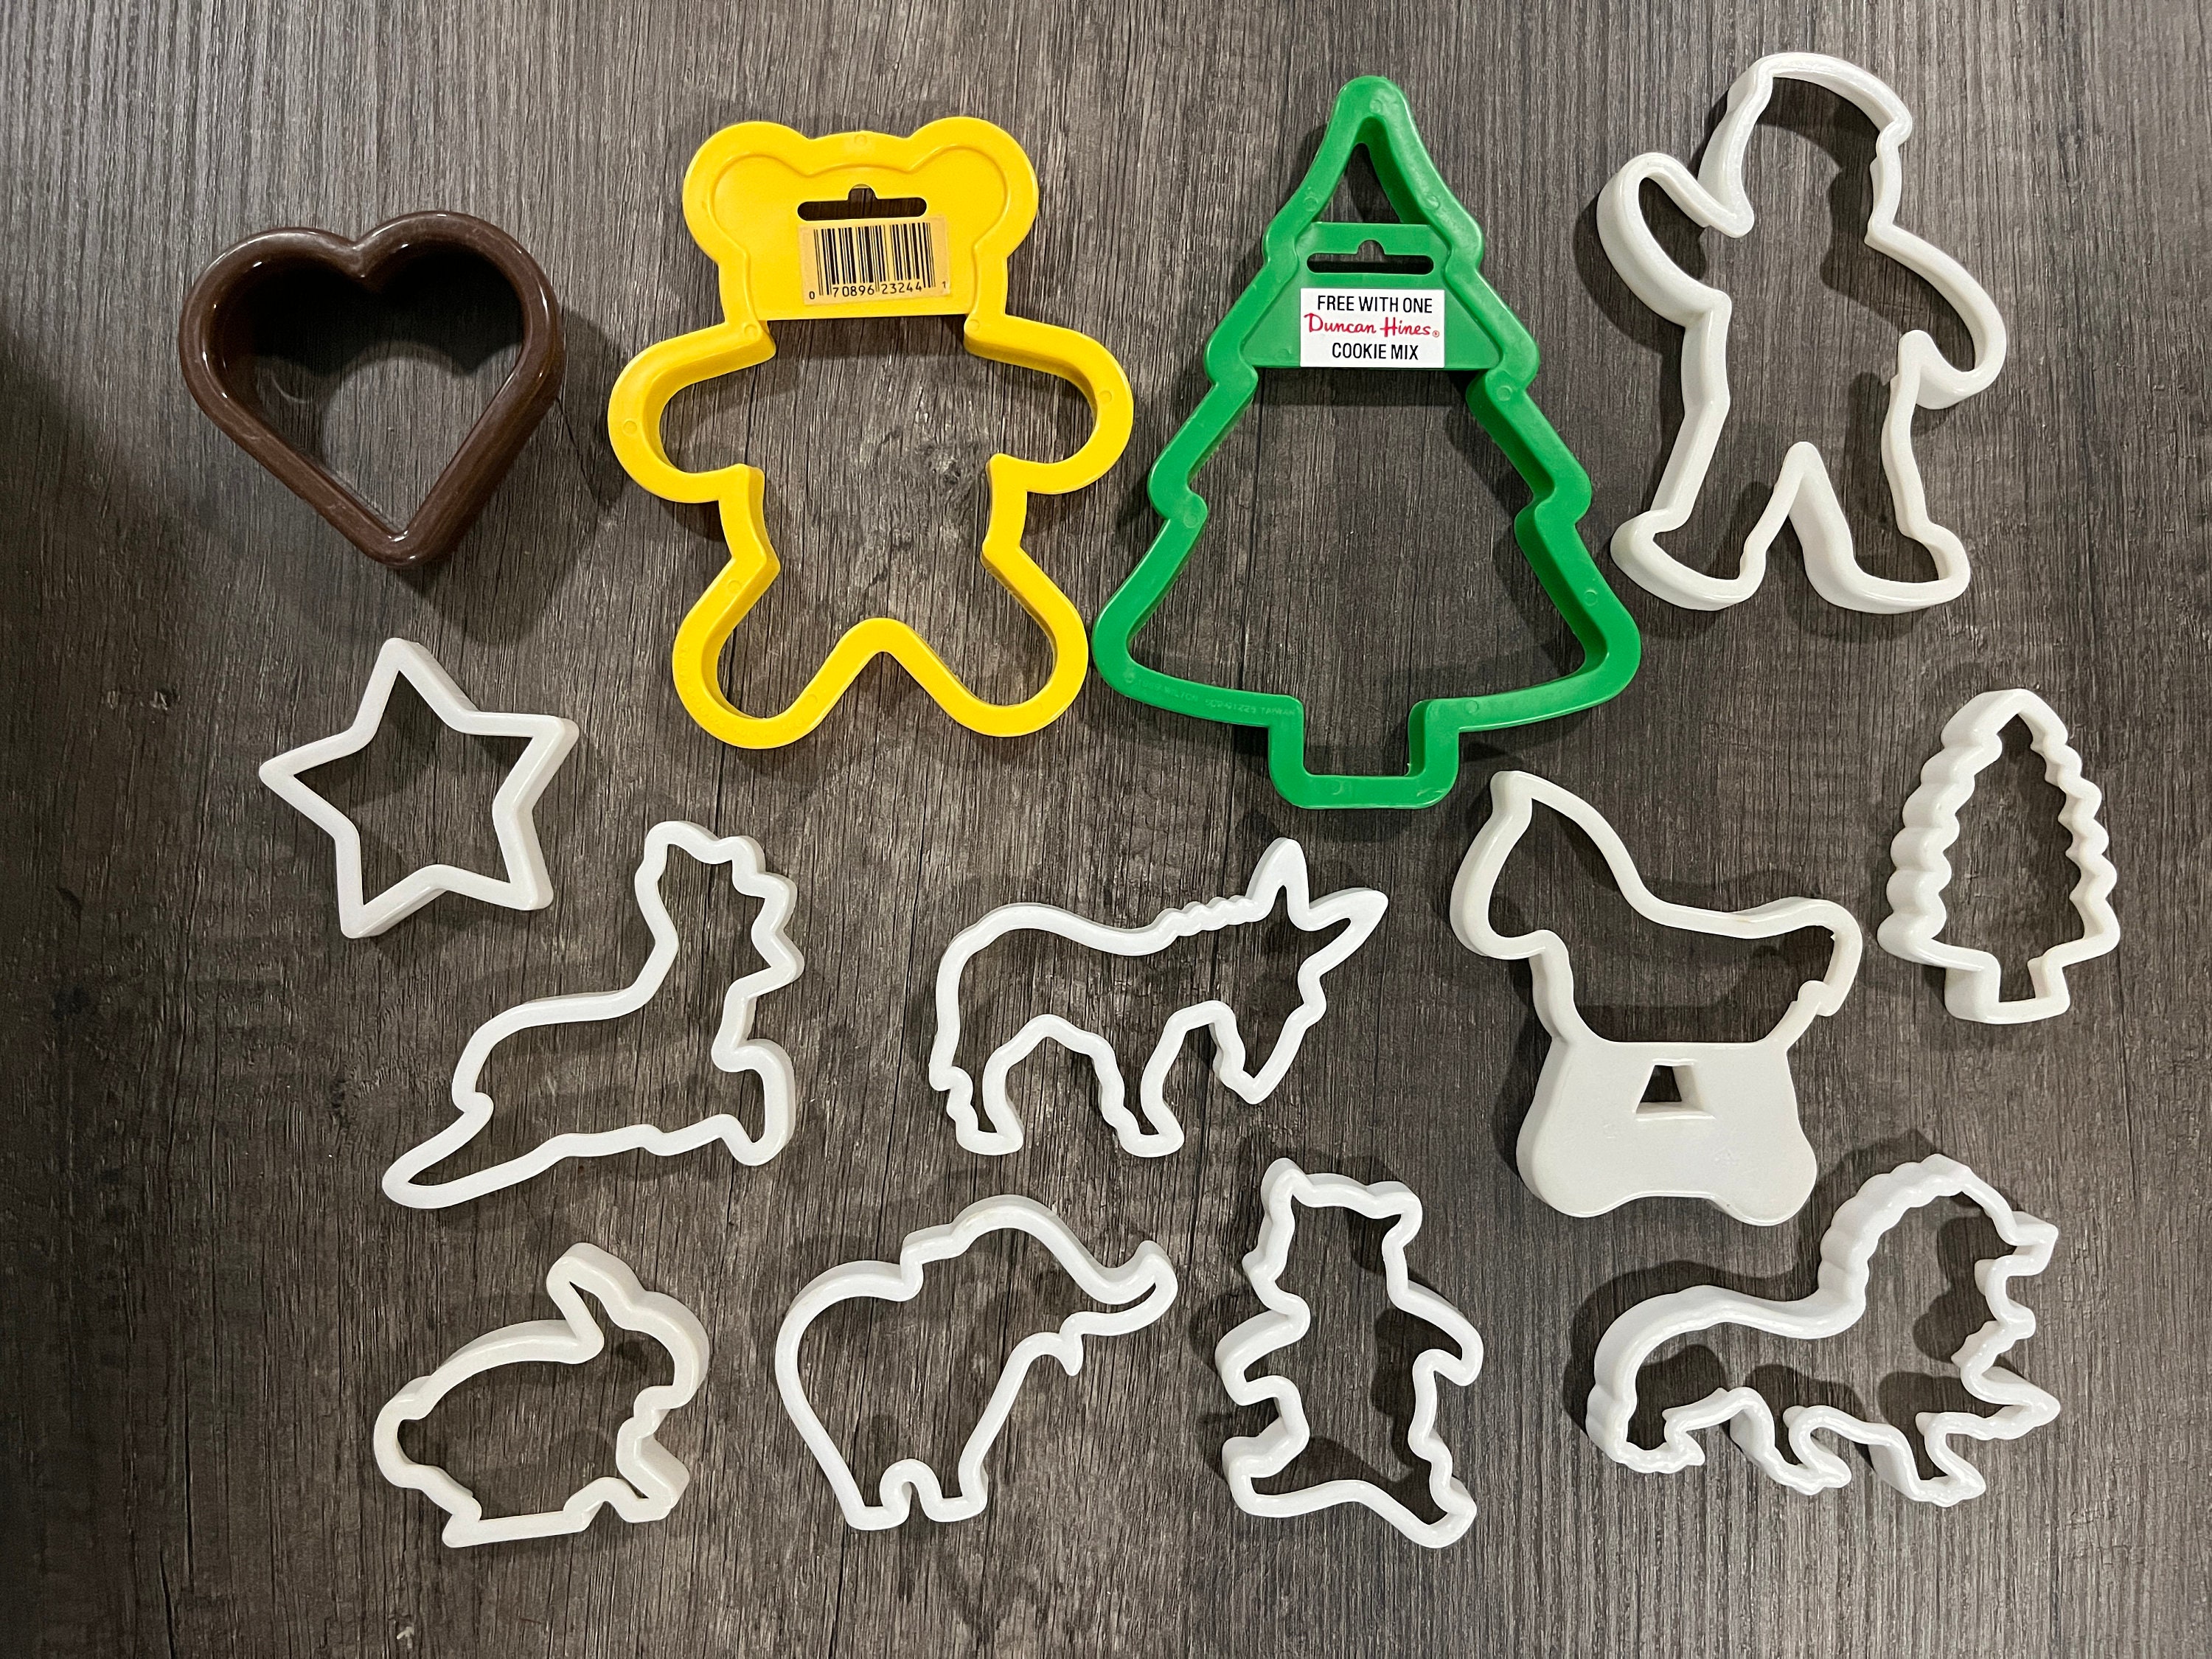 Gorse Puzzle Pieces Stainless Steel Fondant Cutter Cookie Cutter Cake Art Birthday Party Decoration Mold